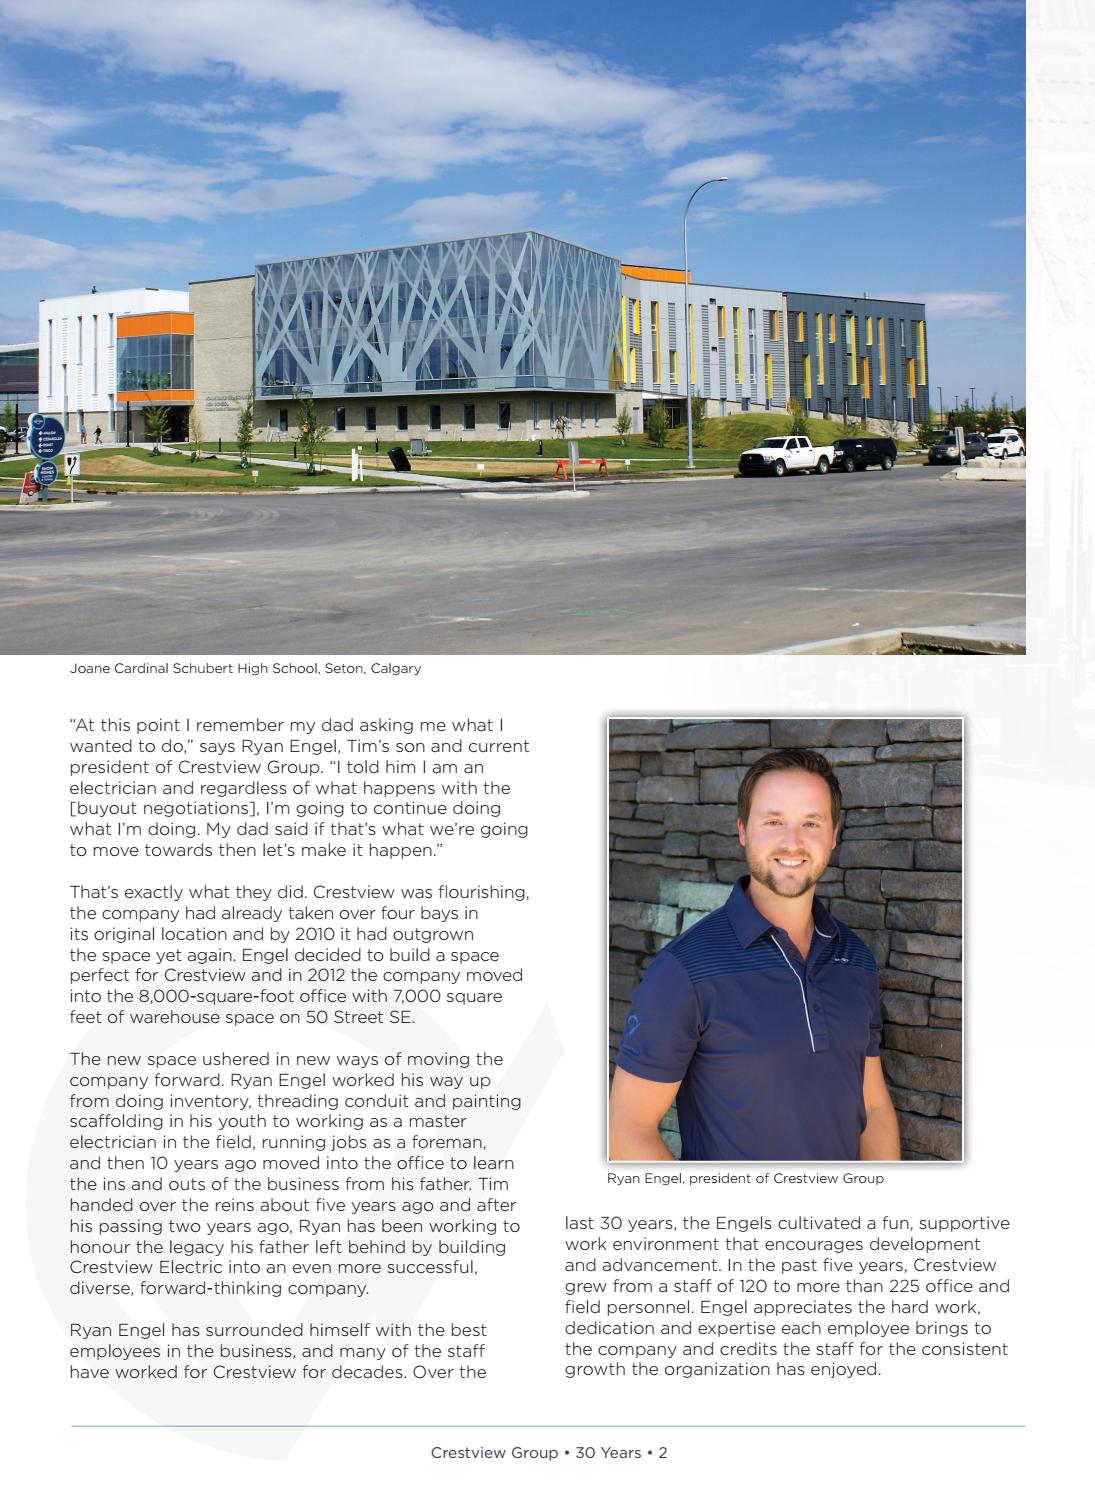 Business in Calgary Magazine - Business Profile for Crestview Group